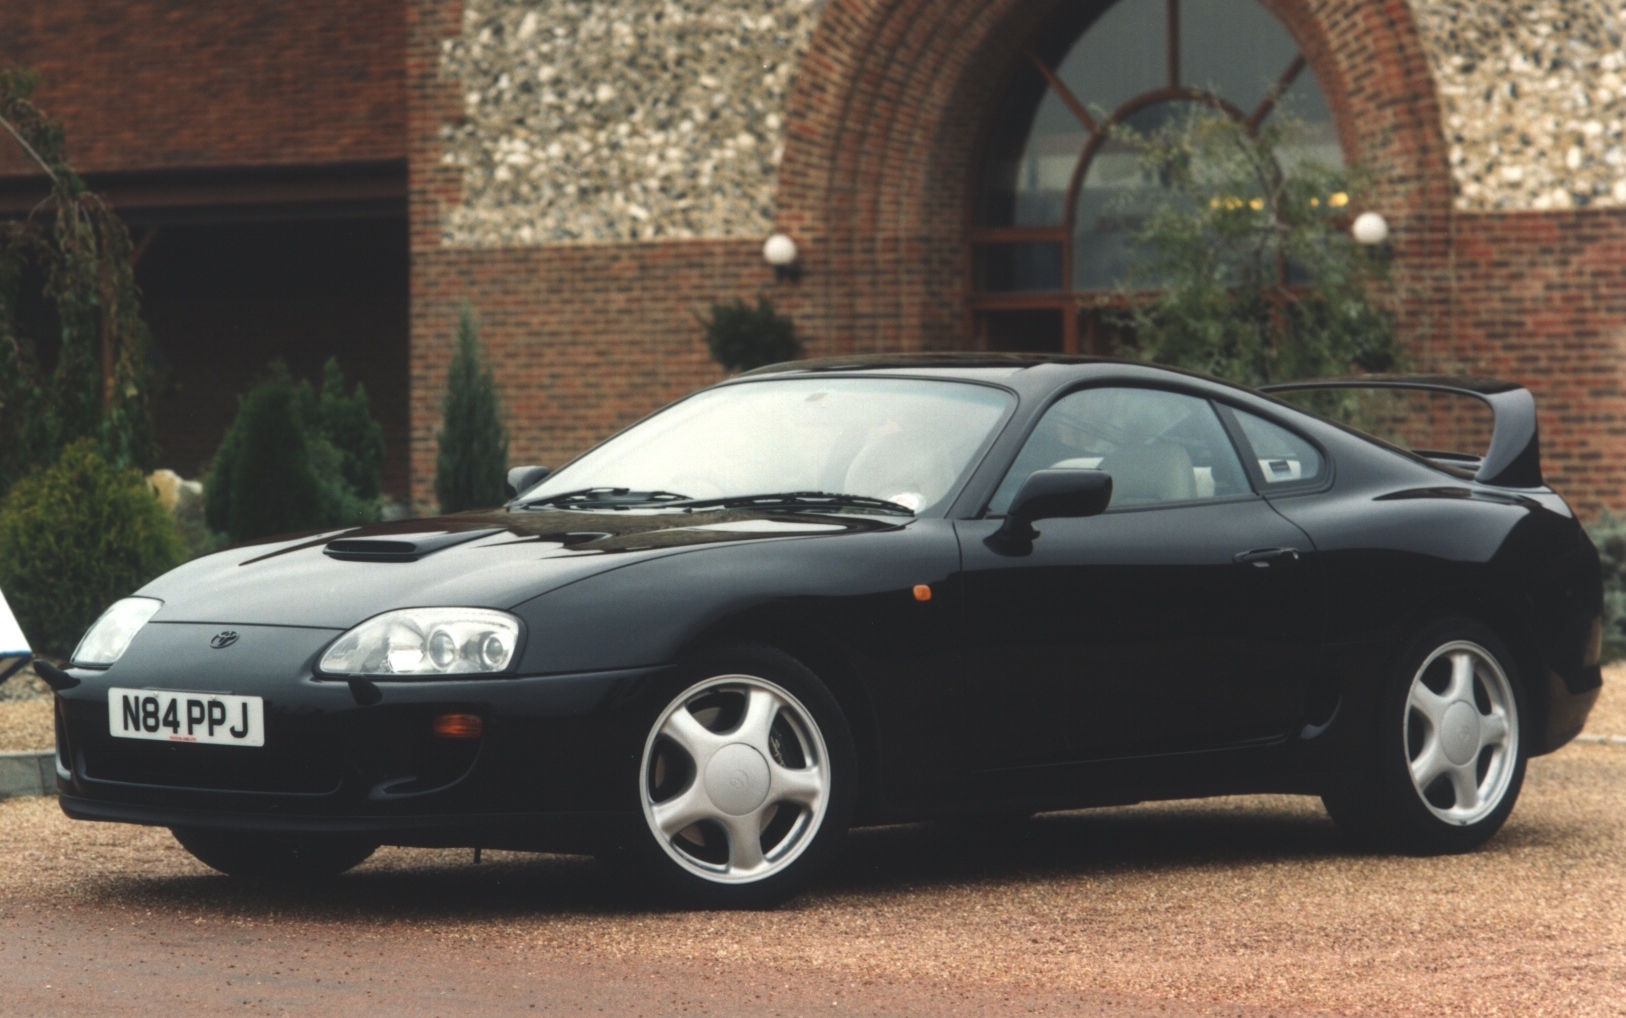 The One That Got Away: Ben Collins on the badass Toyota Supra that lived fast and died young